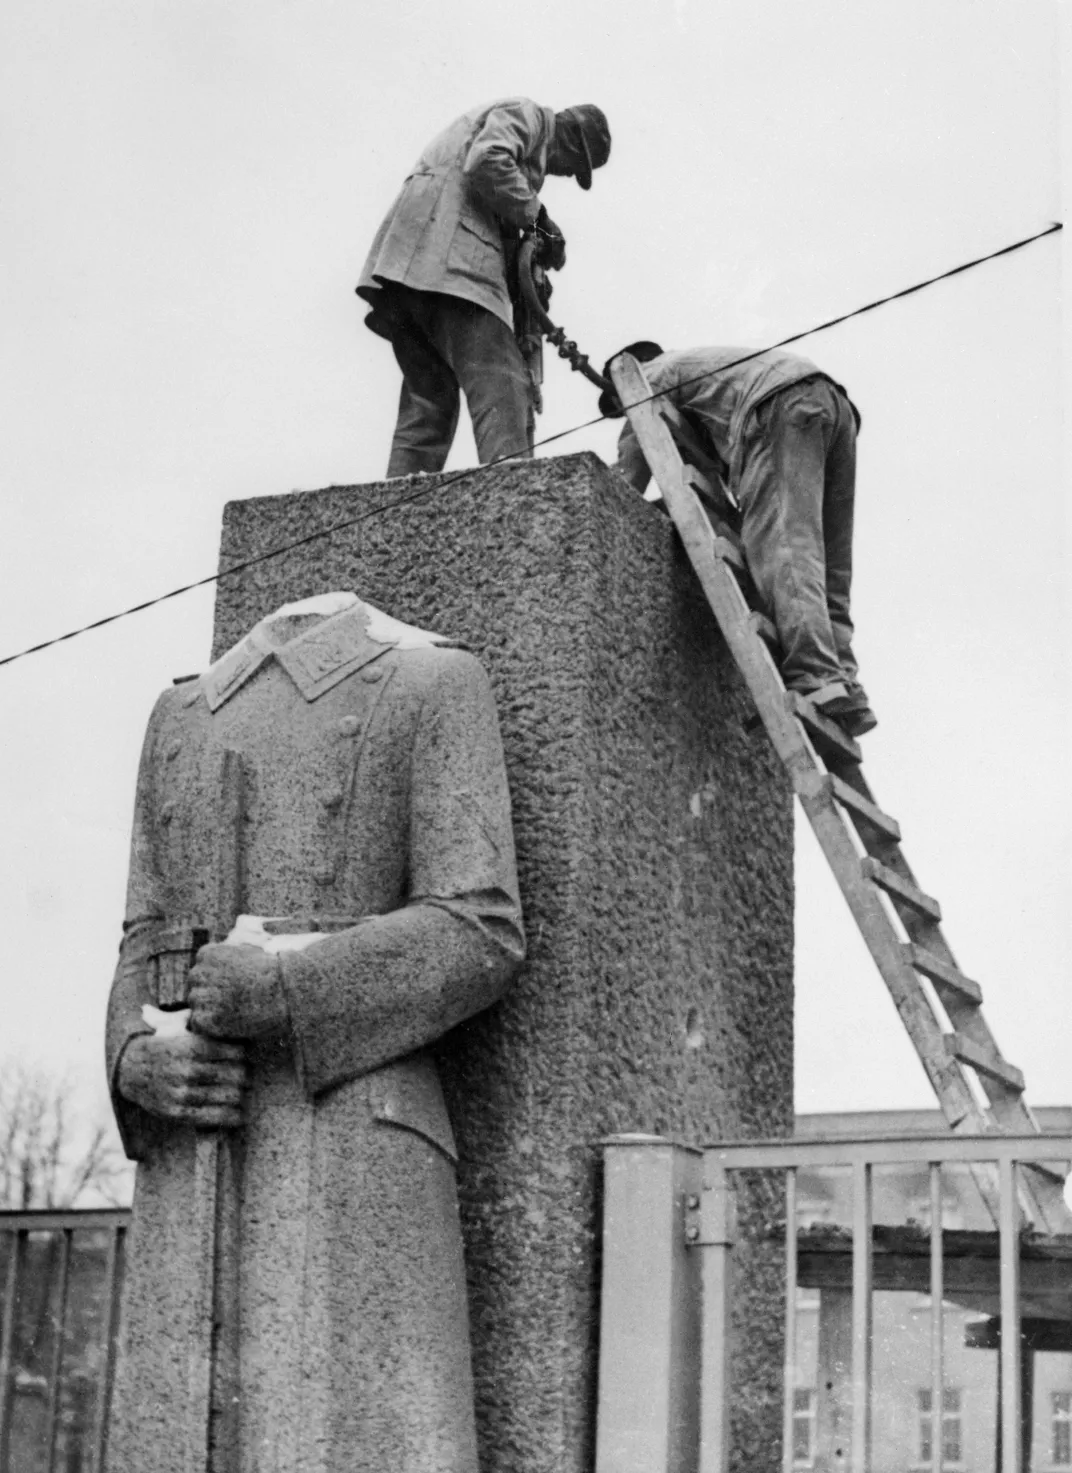 In 1945, workmen in Berlin climb atop a headless statue of a Nazi soldier near barracks now occupied by U.S. troops. The statue was later demolished as part of the de-Nazification program.